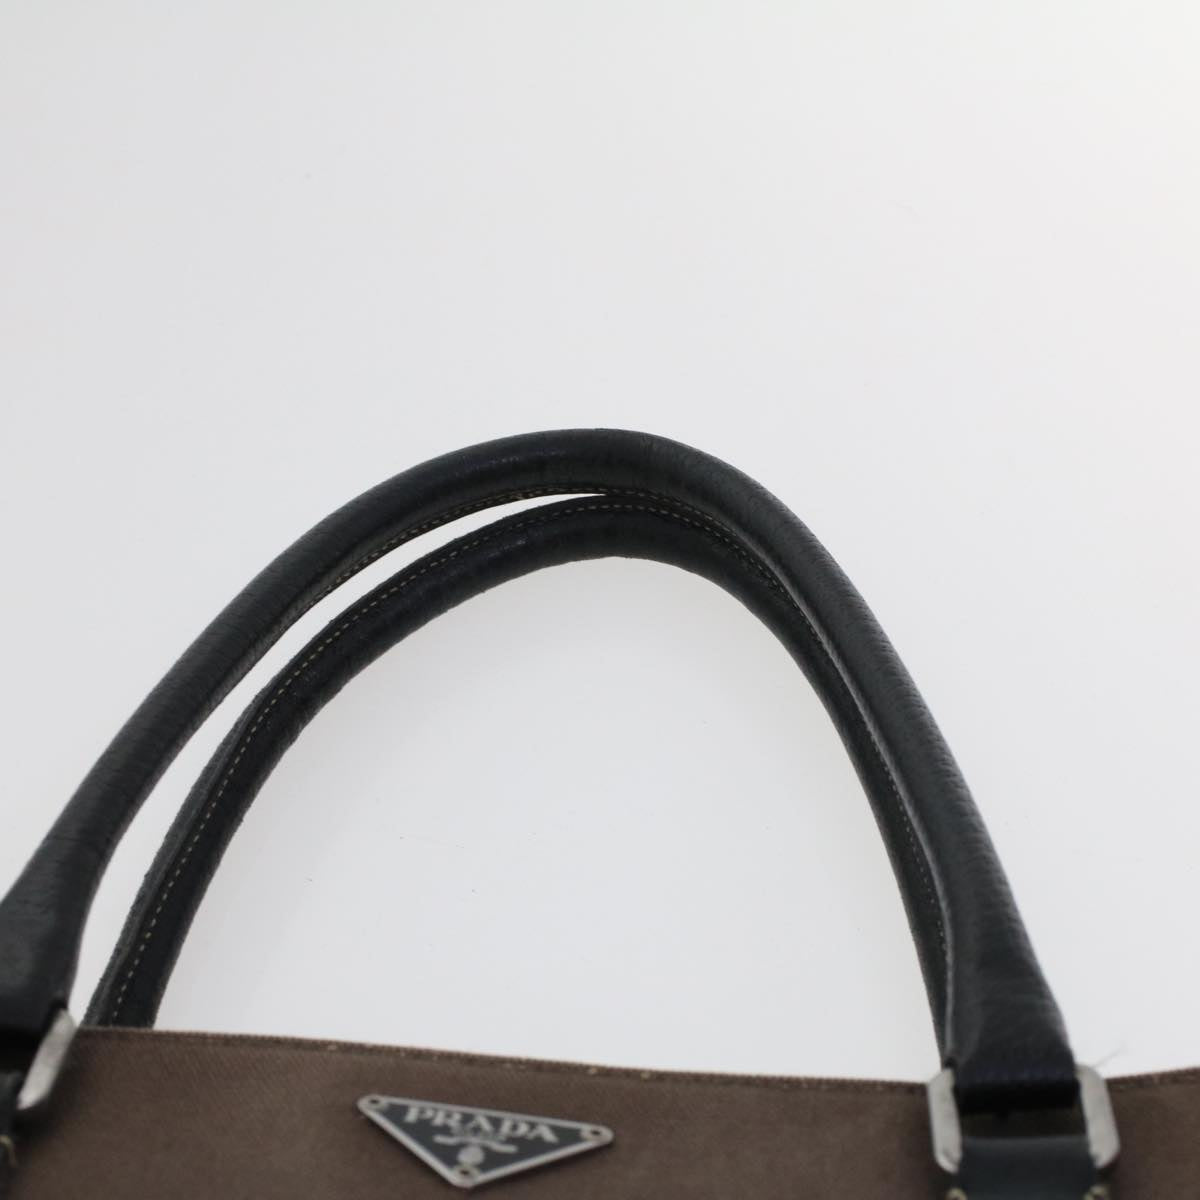 PRADA Tote Bag Canvas Leather Brown Auth bs5887